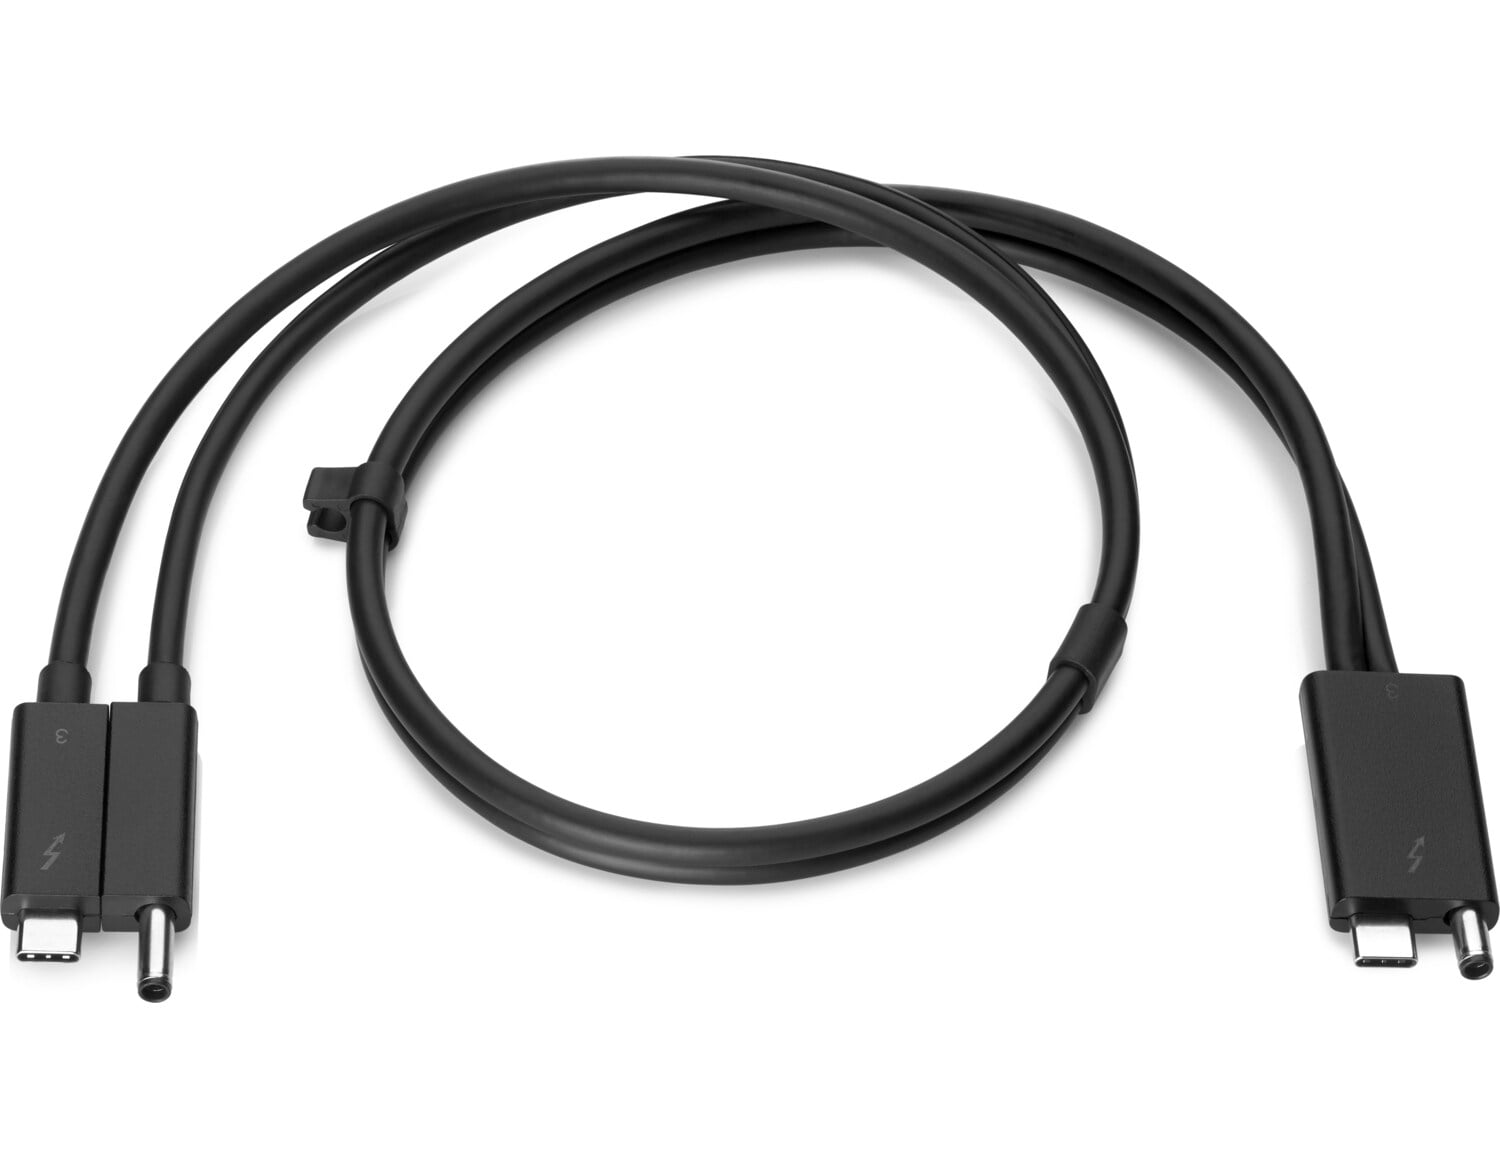 HP Thunderbolt Dock G2 Combo Cable